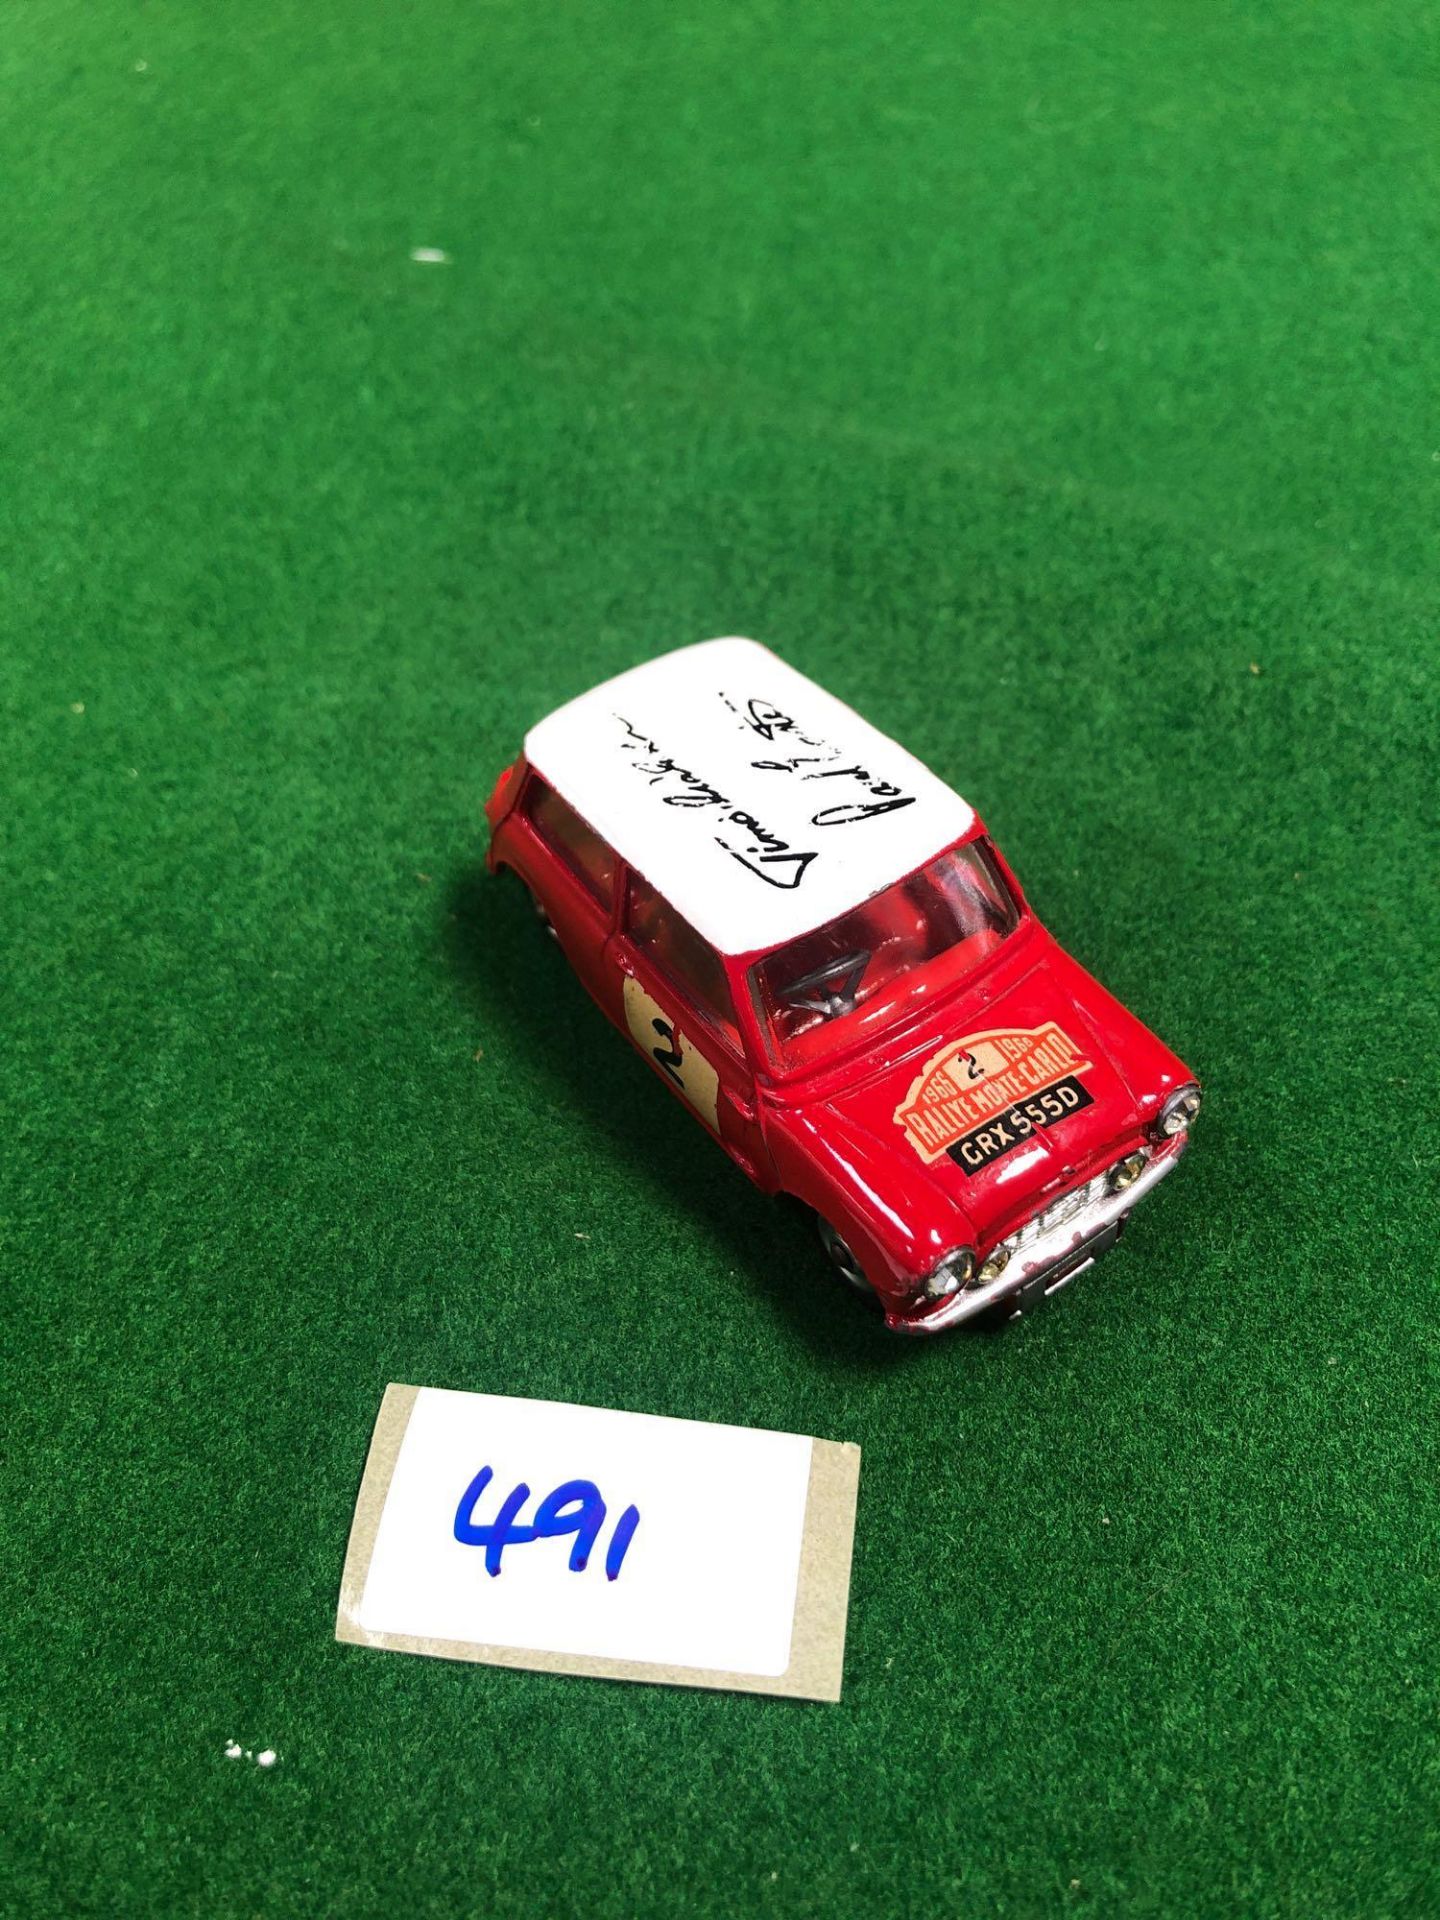 Corgi 321 Diecast BMC Mini Cooper S Monte Carlo Rally Car In Red With White Roof With Racing